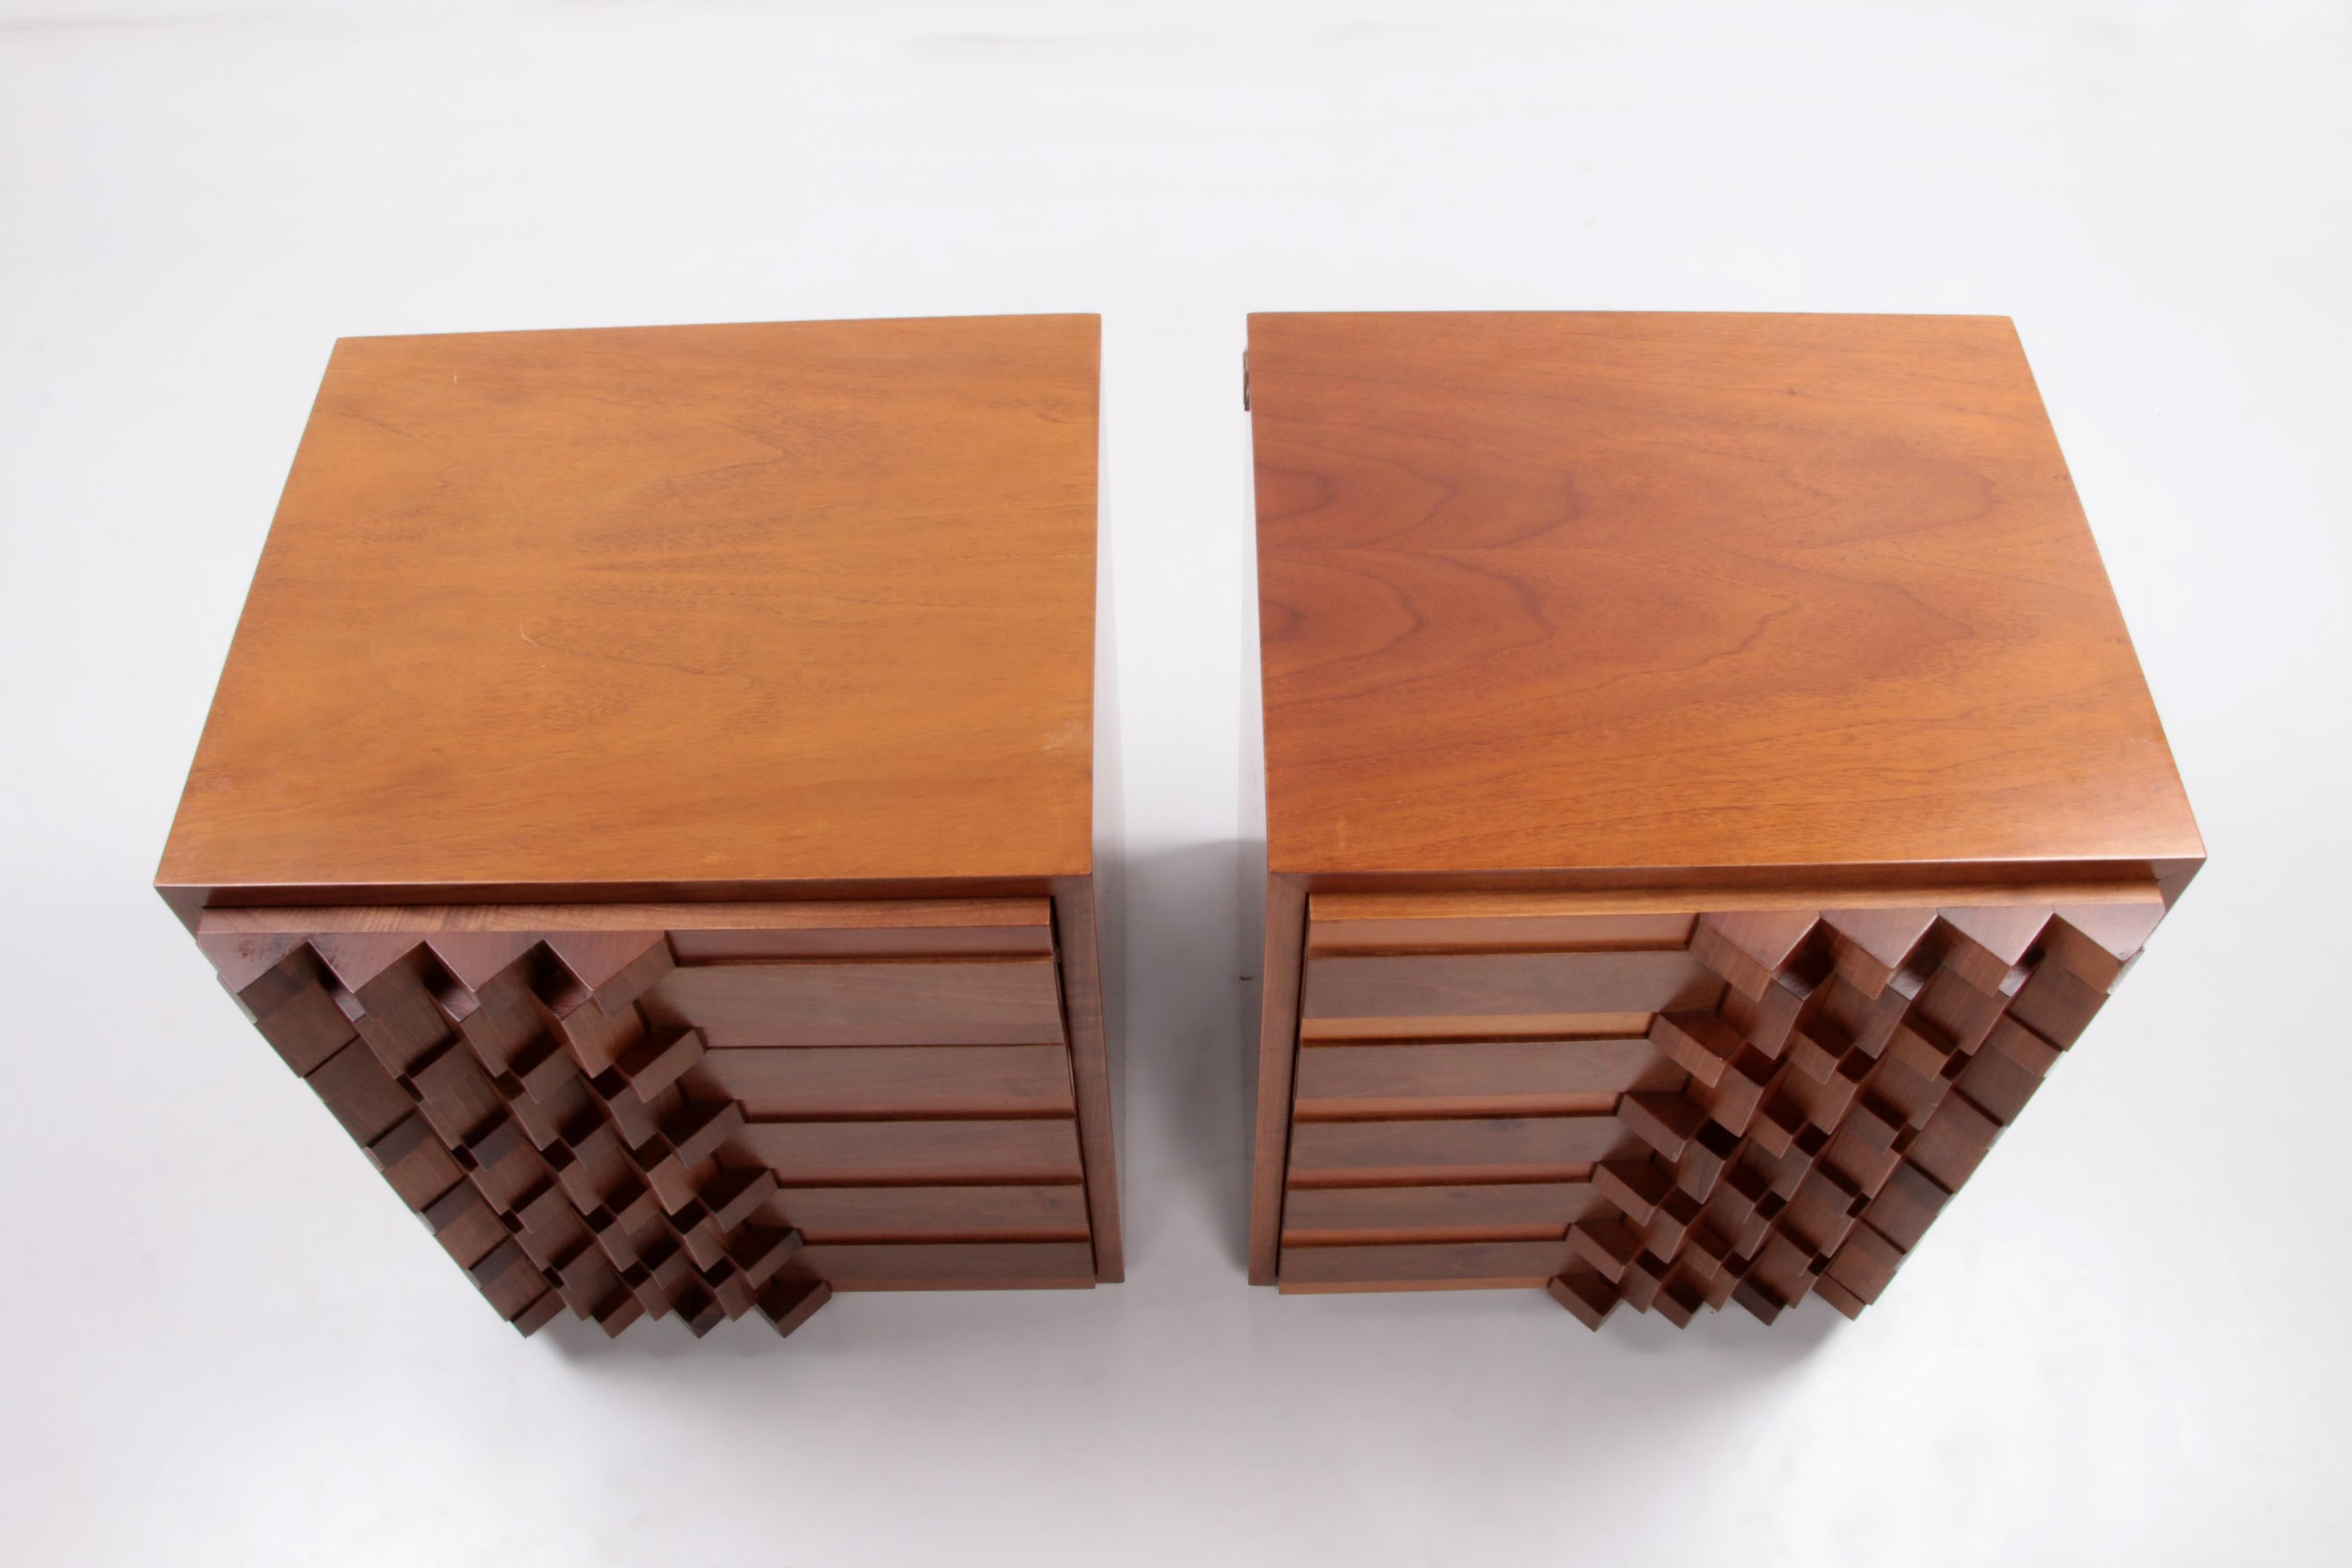 Vintage Luciano Frigerio Bedside Tables with Graphic Doors, 1970s Italy. For Sale 2